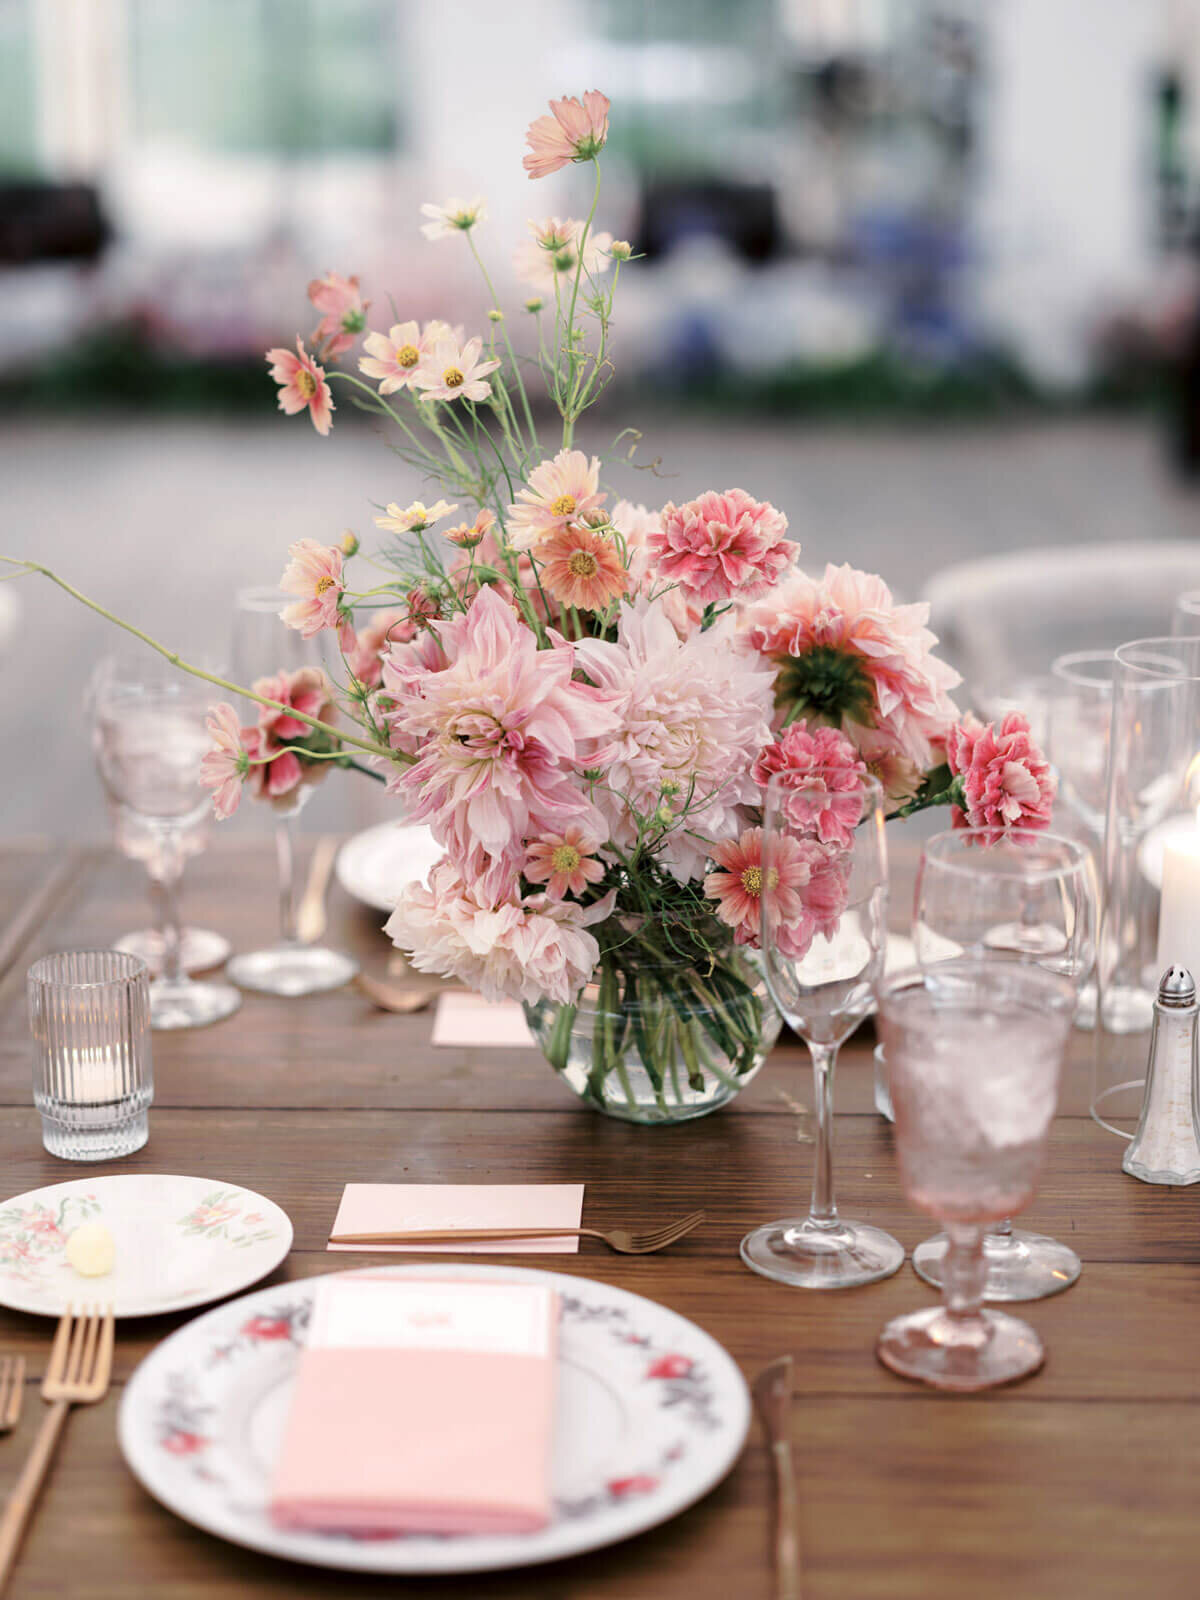 Flowers, napkins, and wine glasses in shades of peach on an elegant wedding reception at The Ausable Club, NY. Image by Jenny Fu Studio